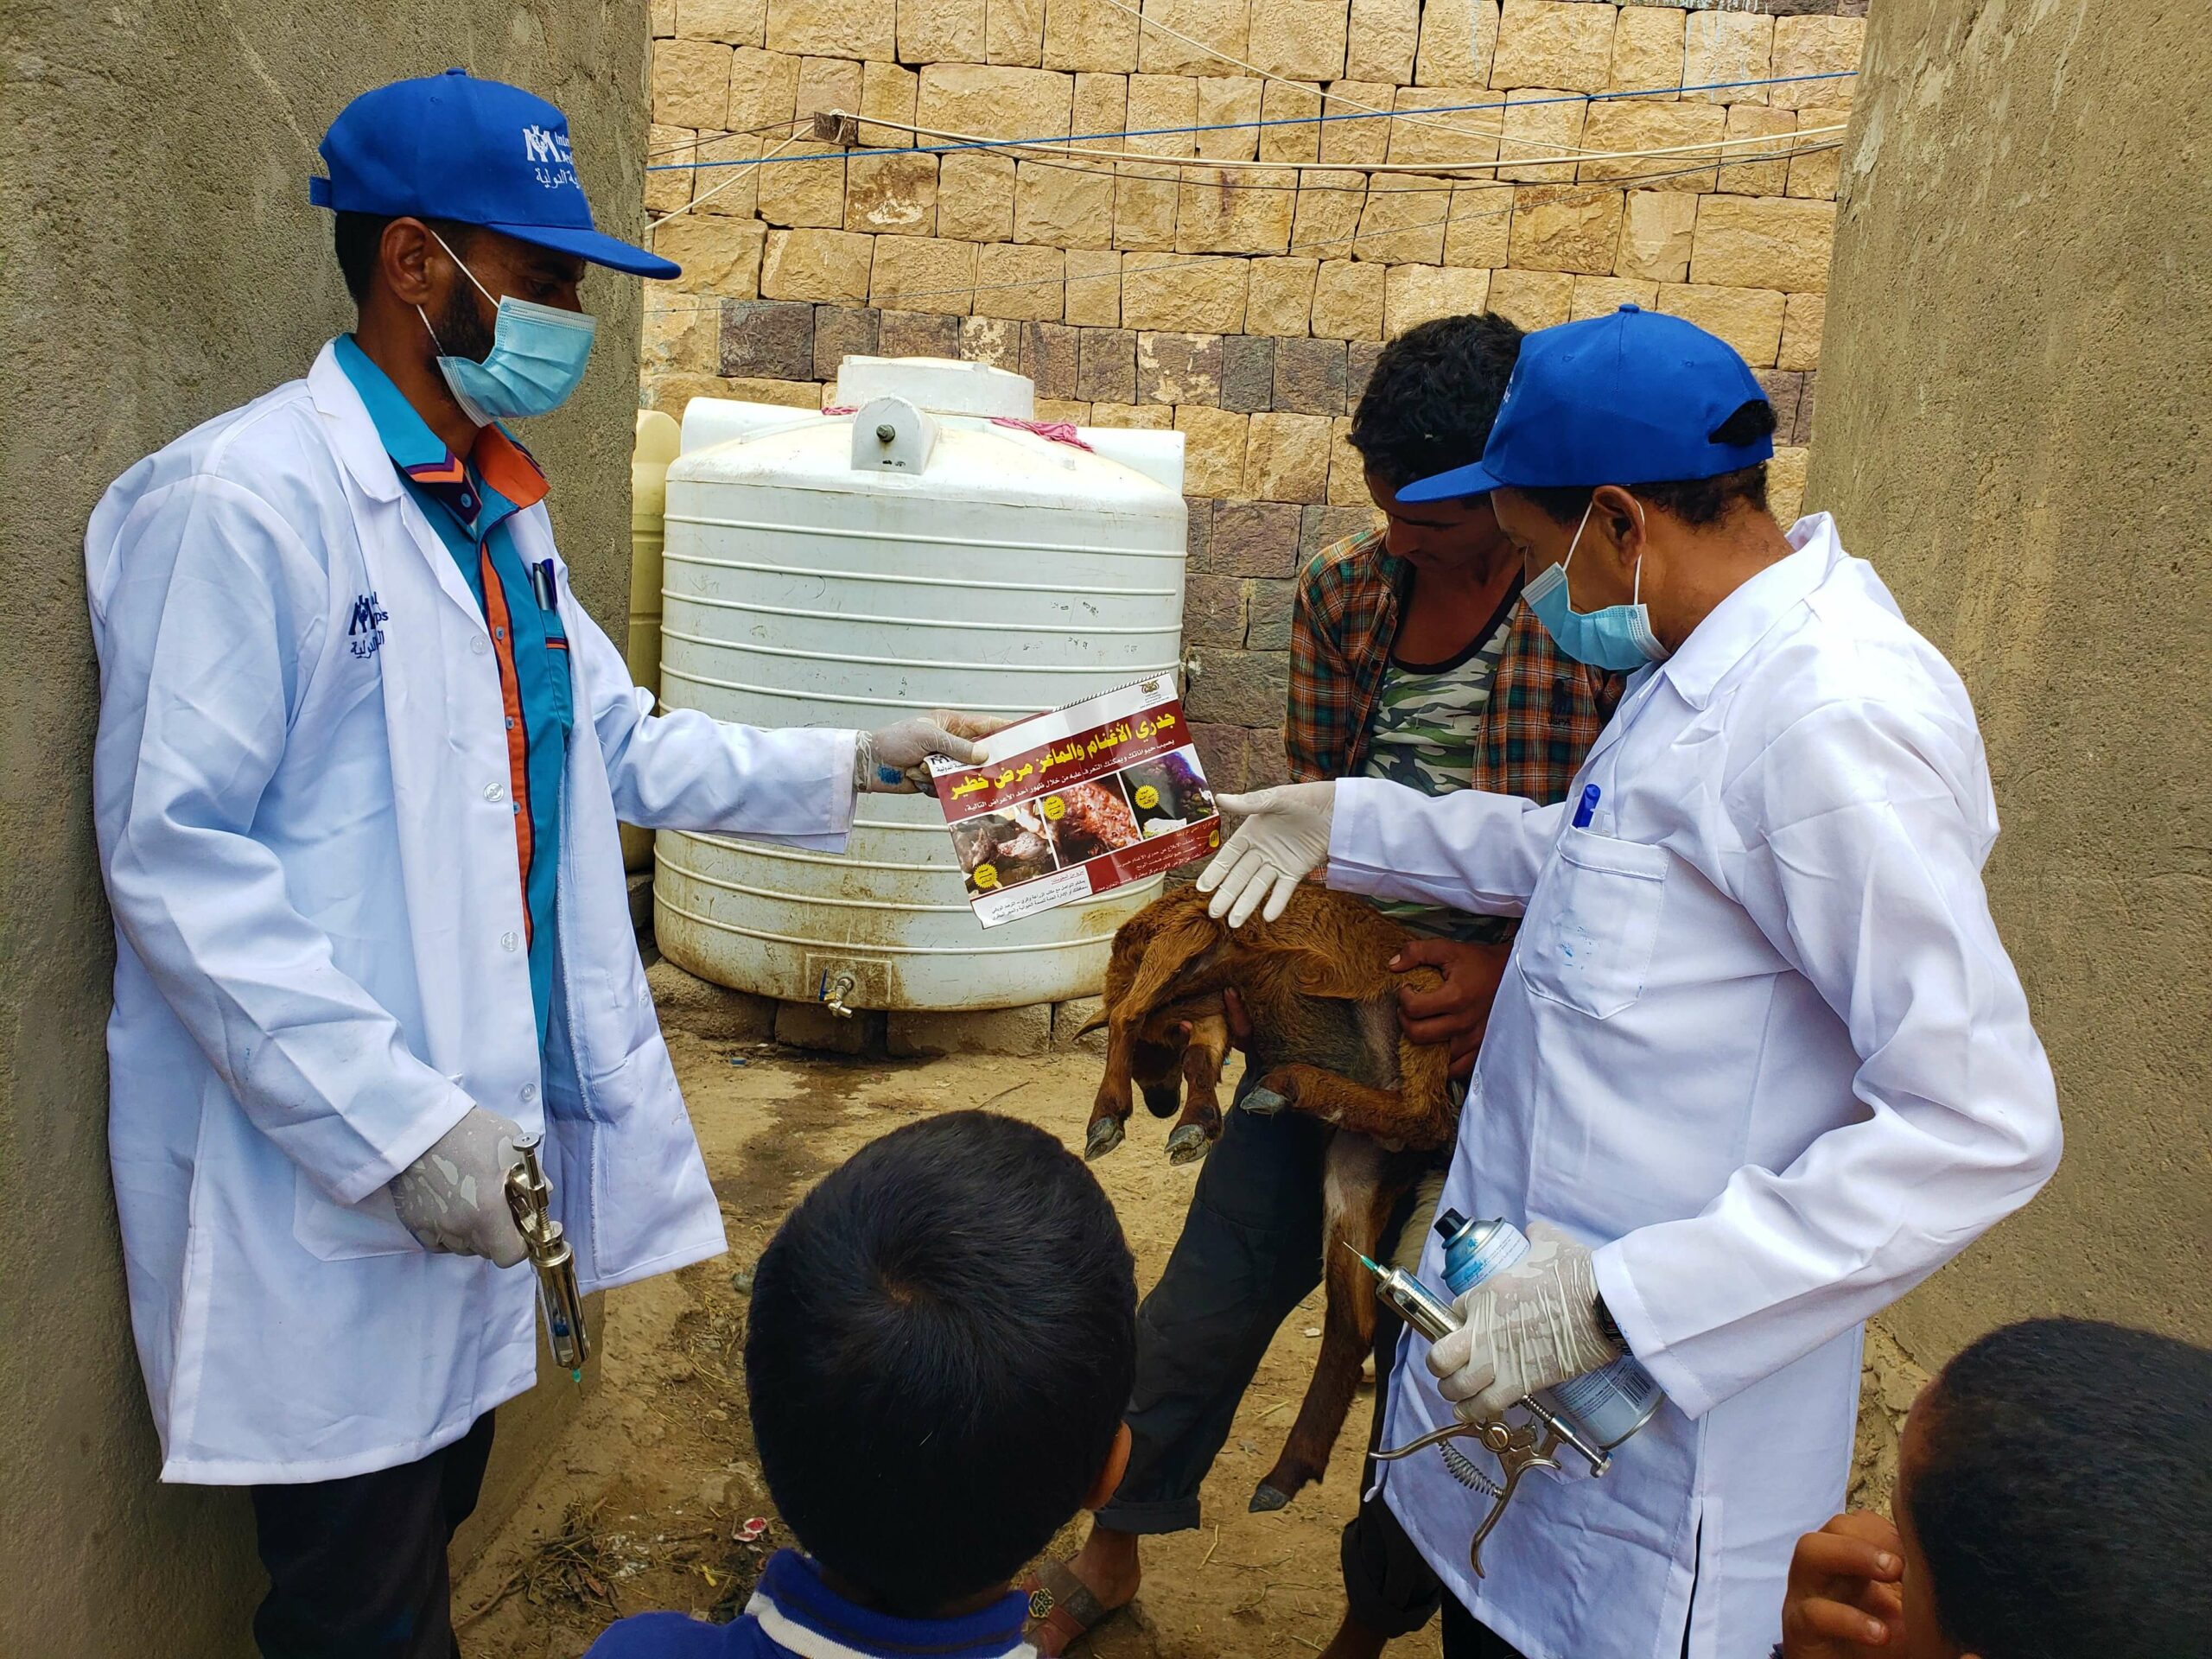 Our team in the Al Hussein district of Yemen has partnered with the Ministry of Agriculture to vaccinate local livestock.